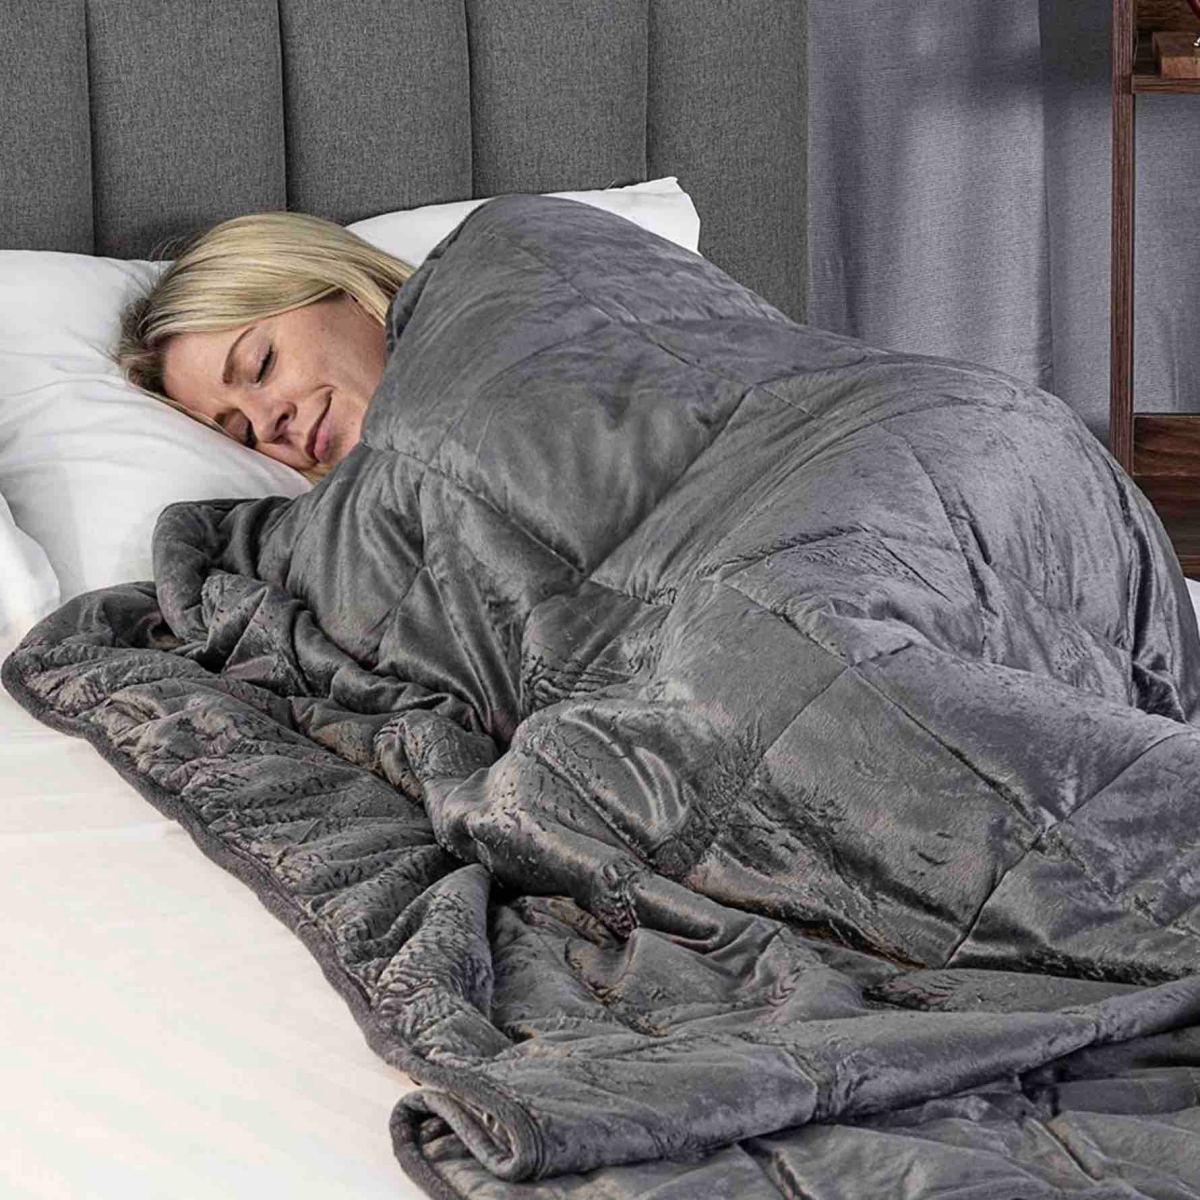 how to make a weighted blanket dark gray blanket on bed woman sleeping under weighted blanket